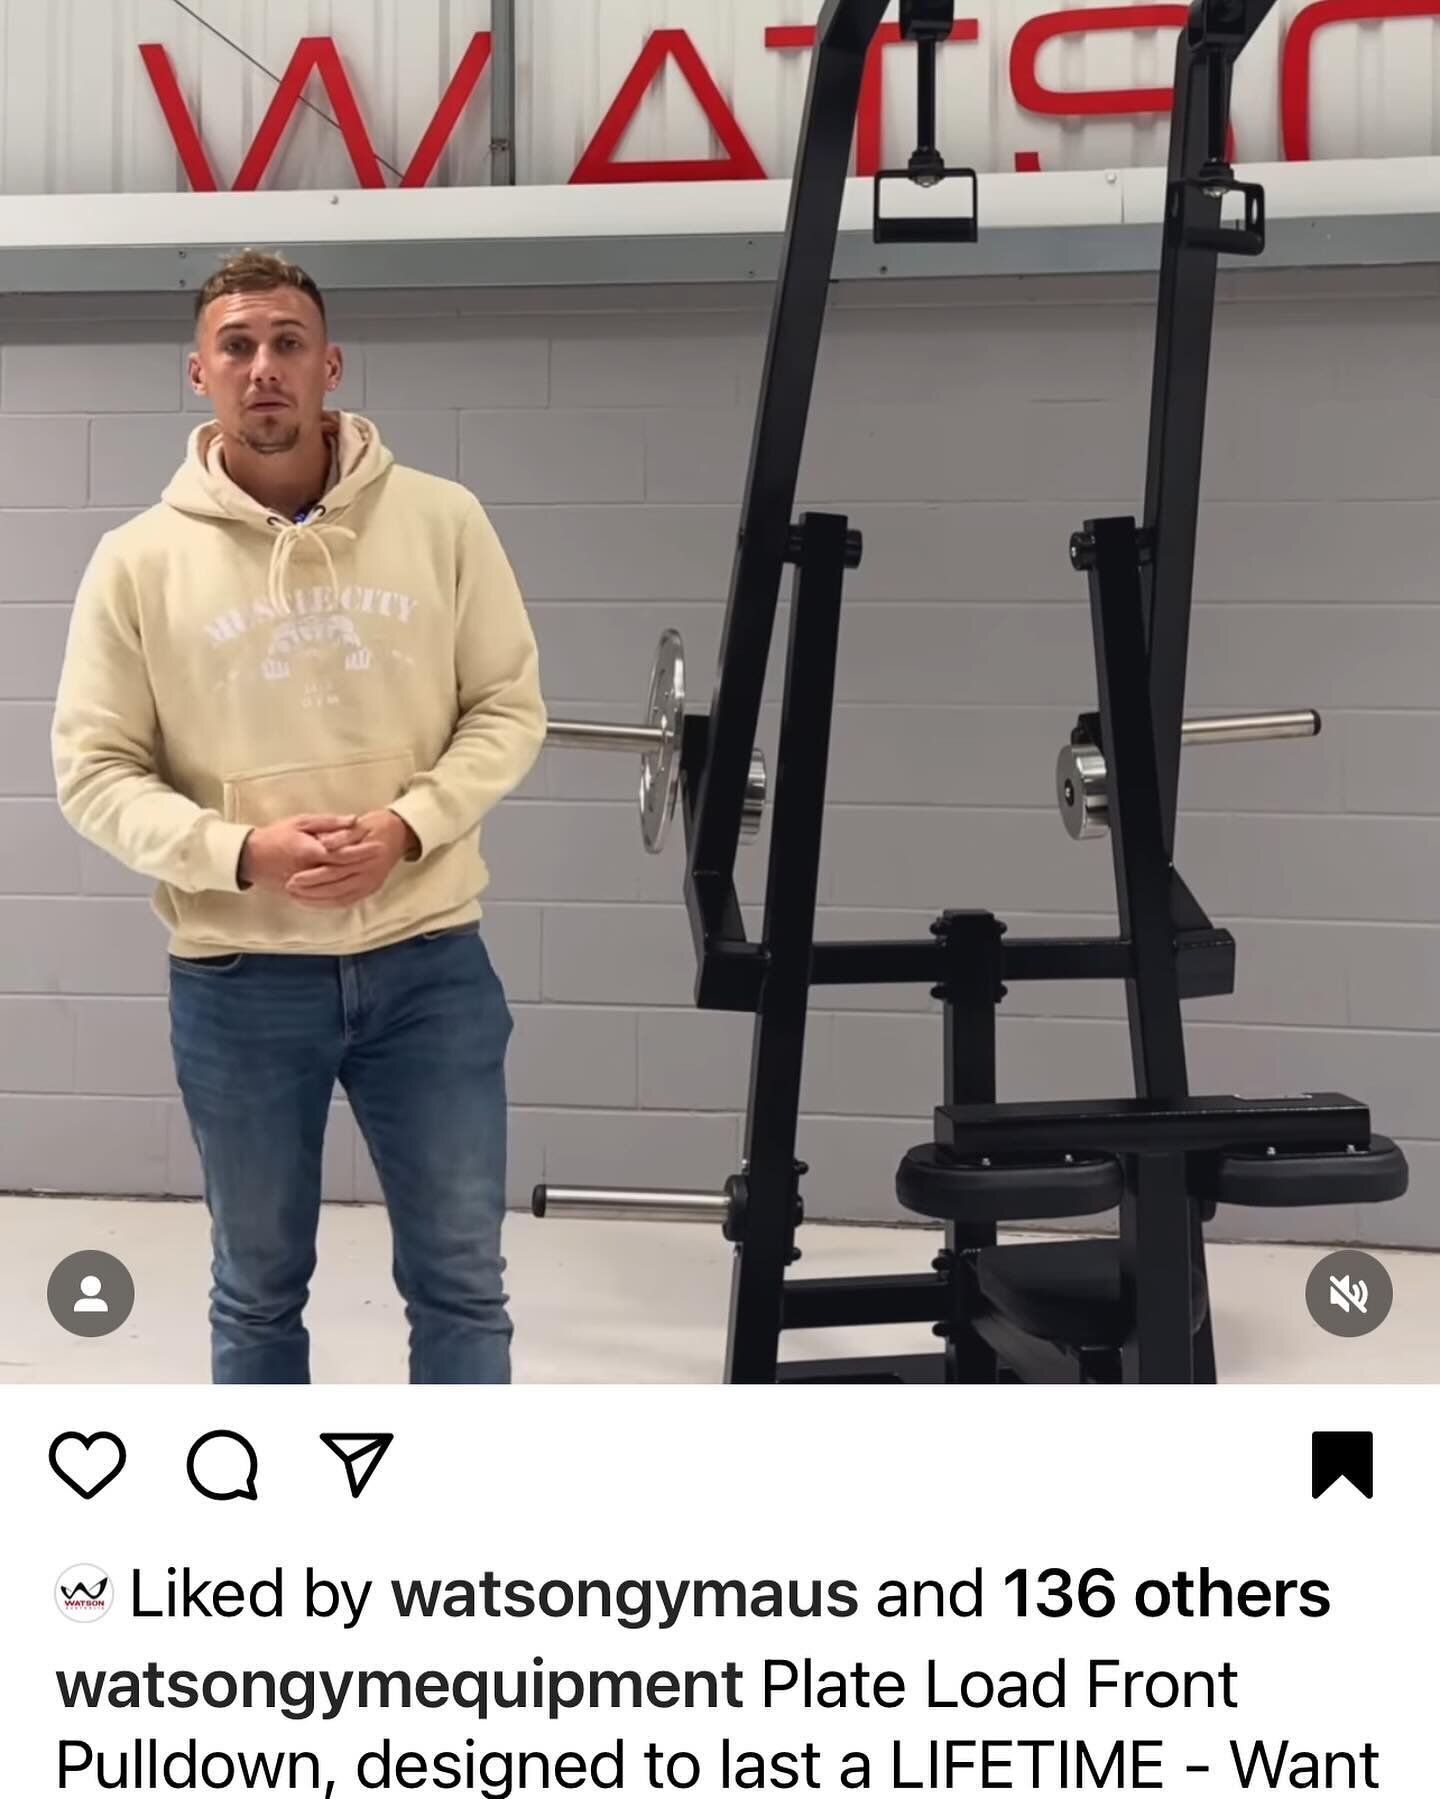 Just added another quality @watsongymequipment piece to our armoury at the @nept_alphington nest. Only the very best for our valued members. Thanks Nick Pang @watsongymaus for your friendly service. #health #fitness #fit #fitnessmodel #fitnessaddict 